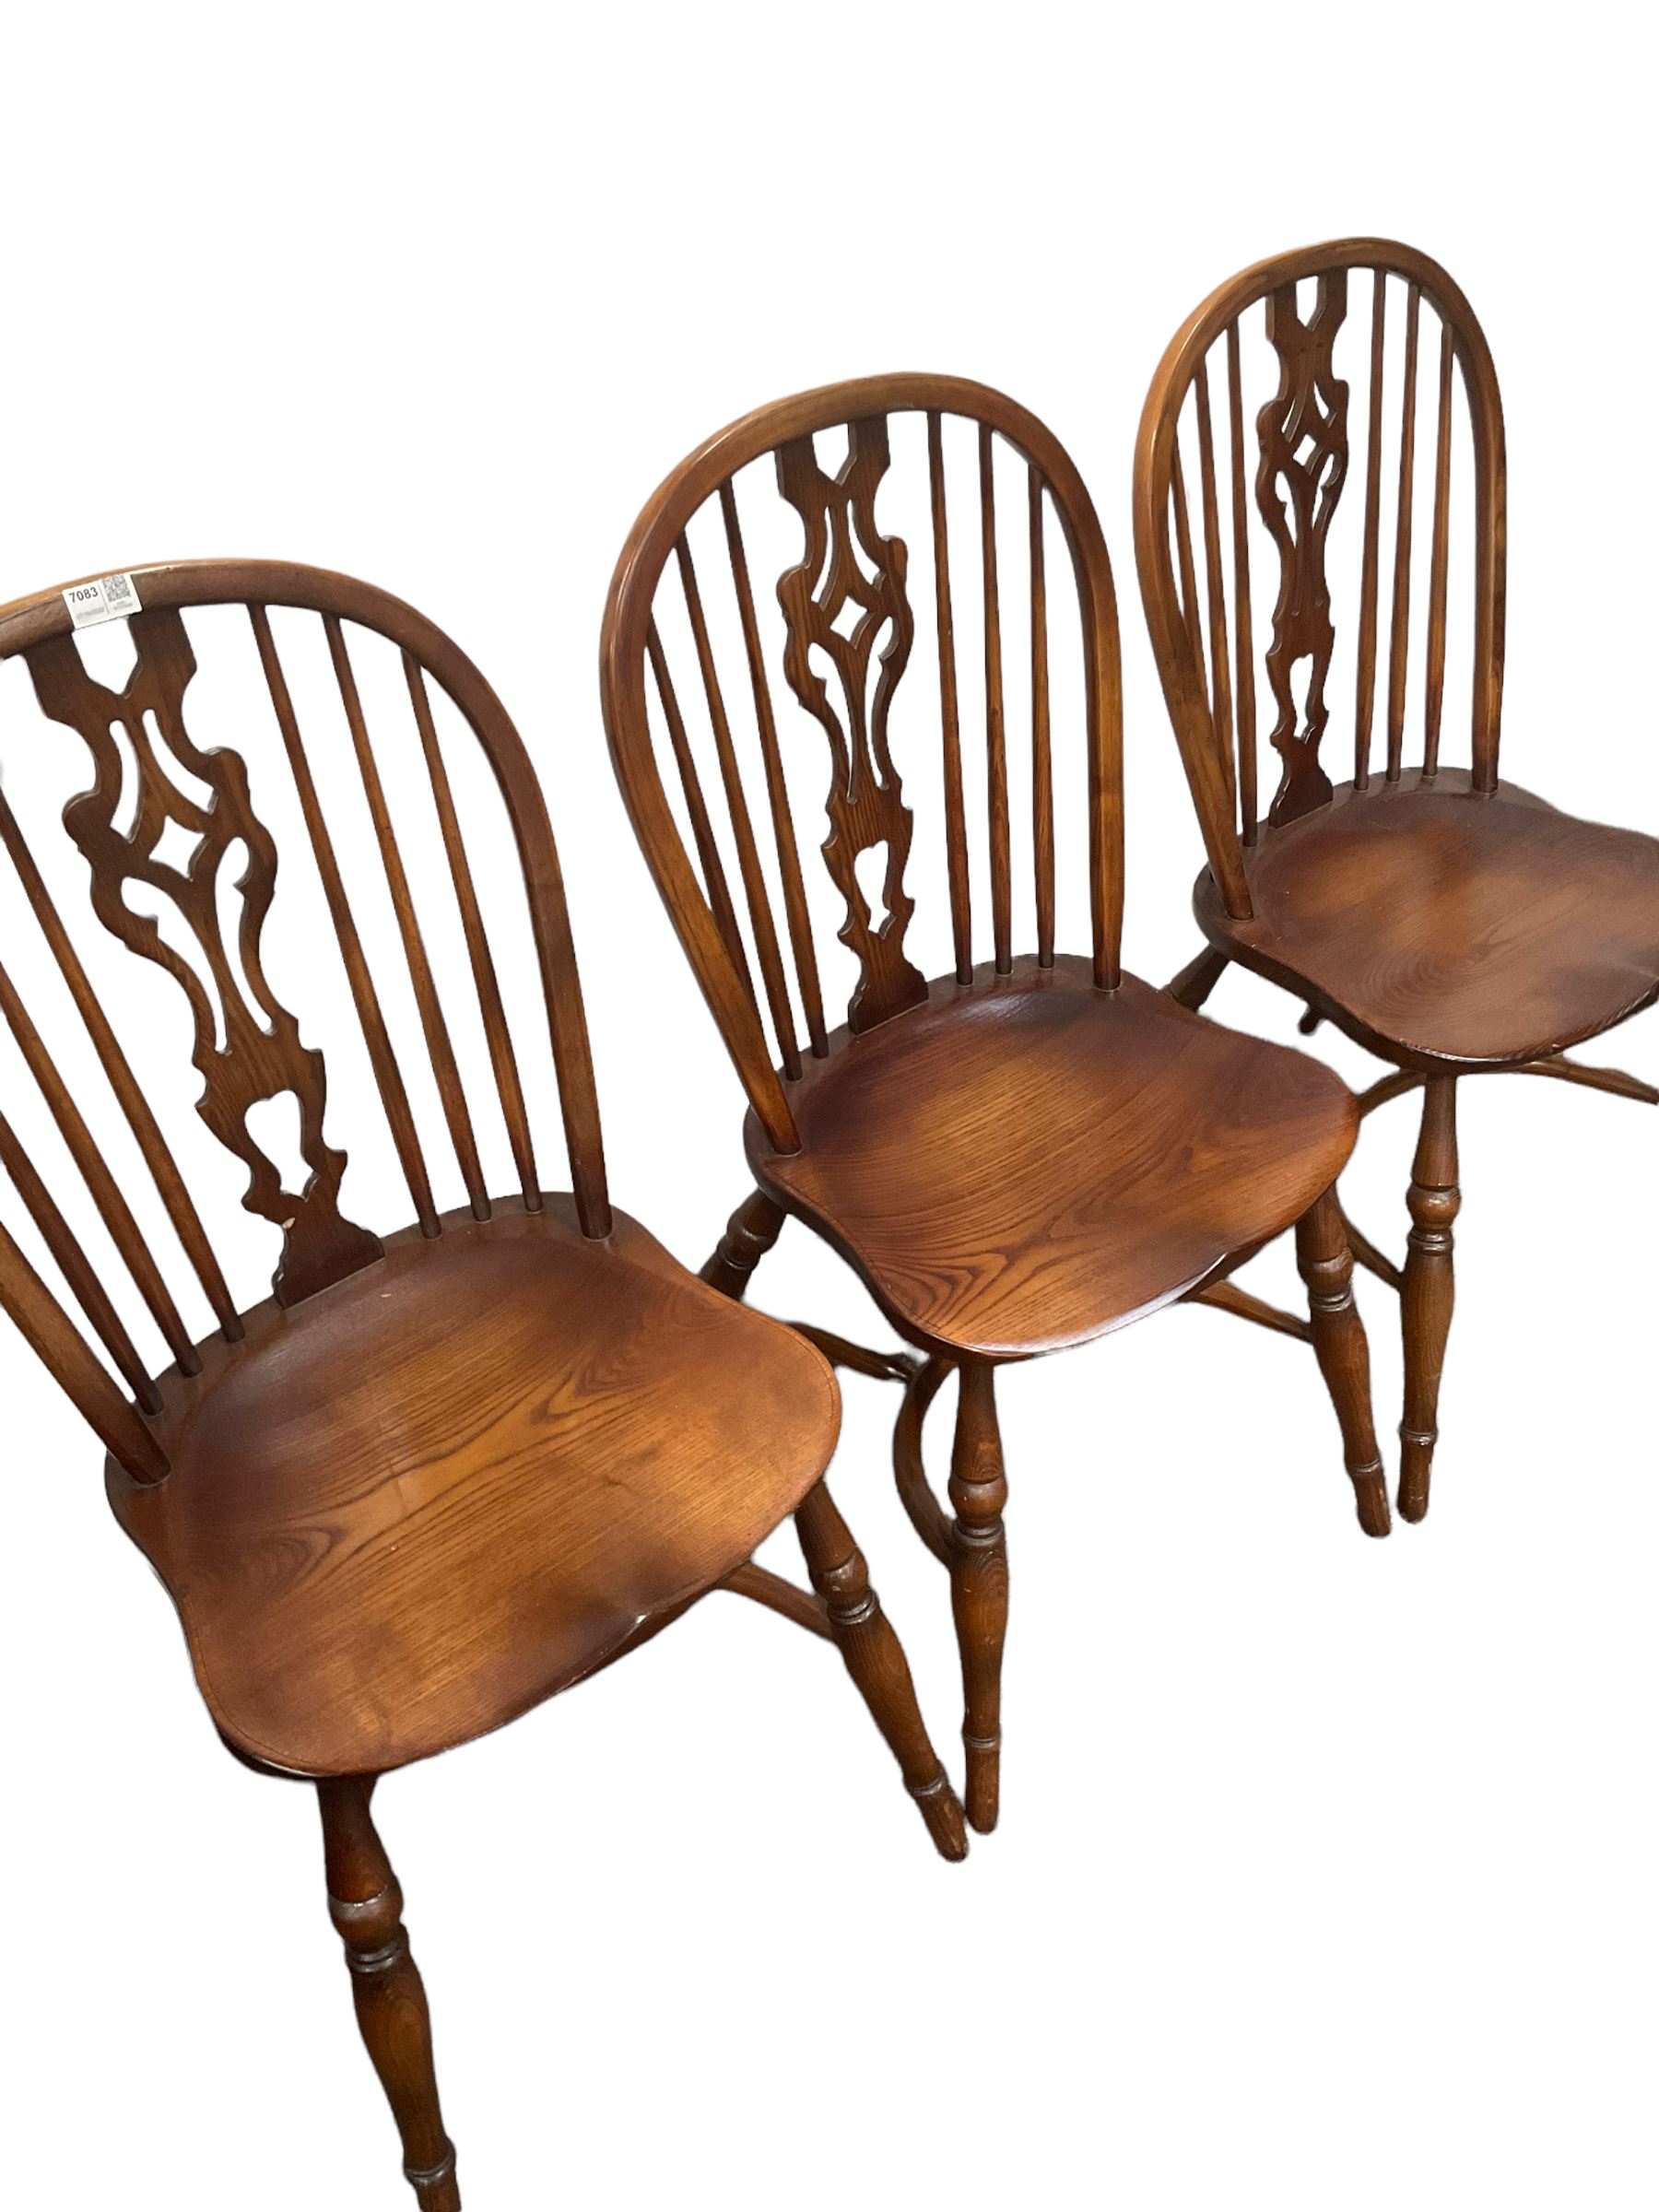 Set three dining chairs - Image 3 of 4